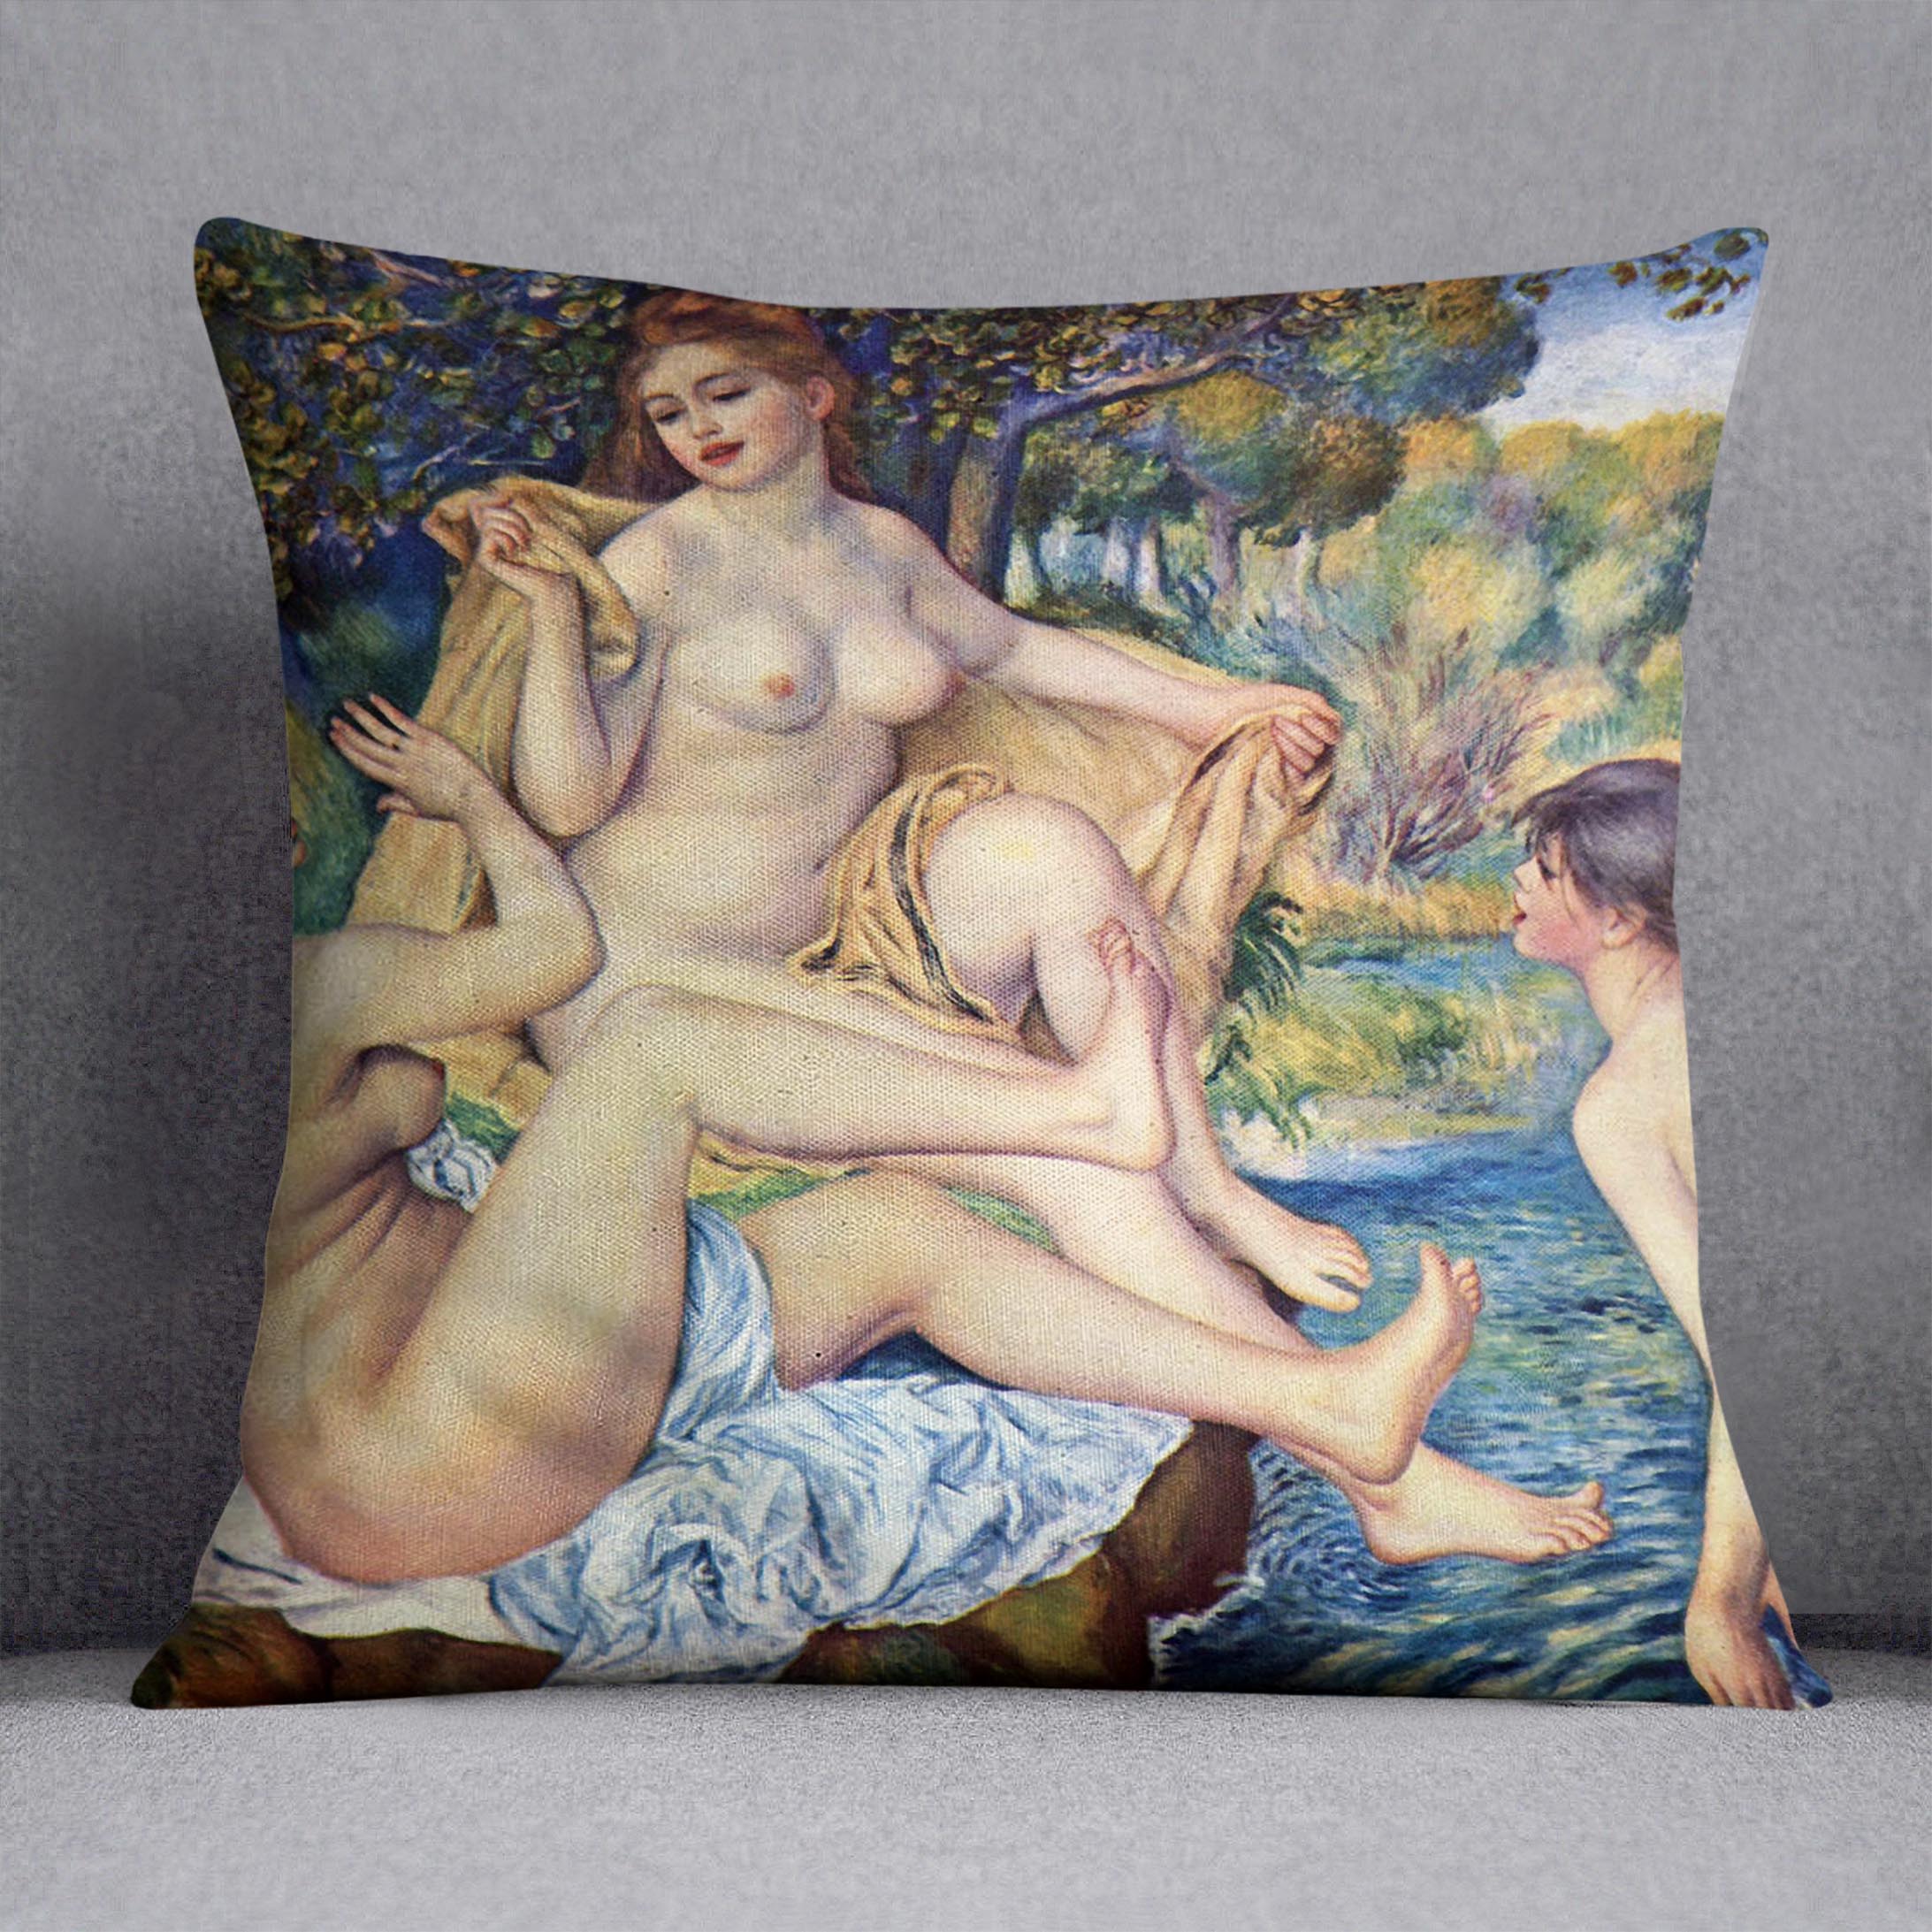 The Large Bathers by Renoir Cushion